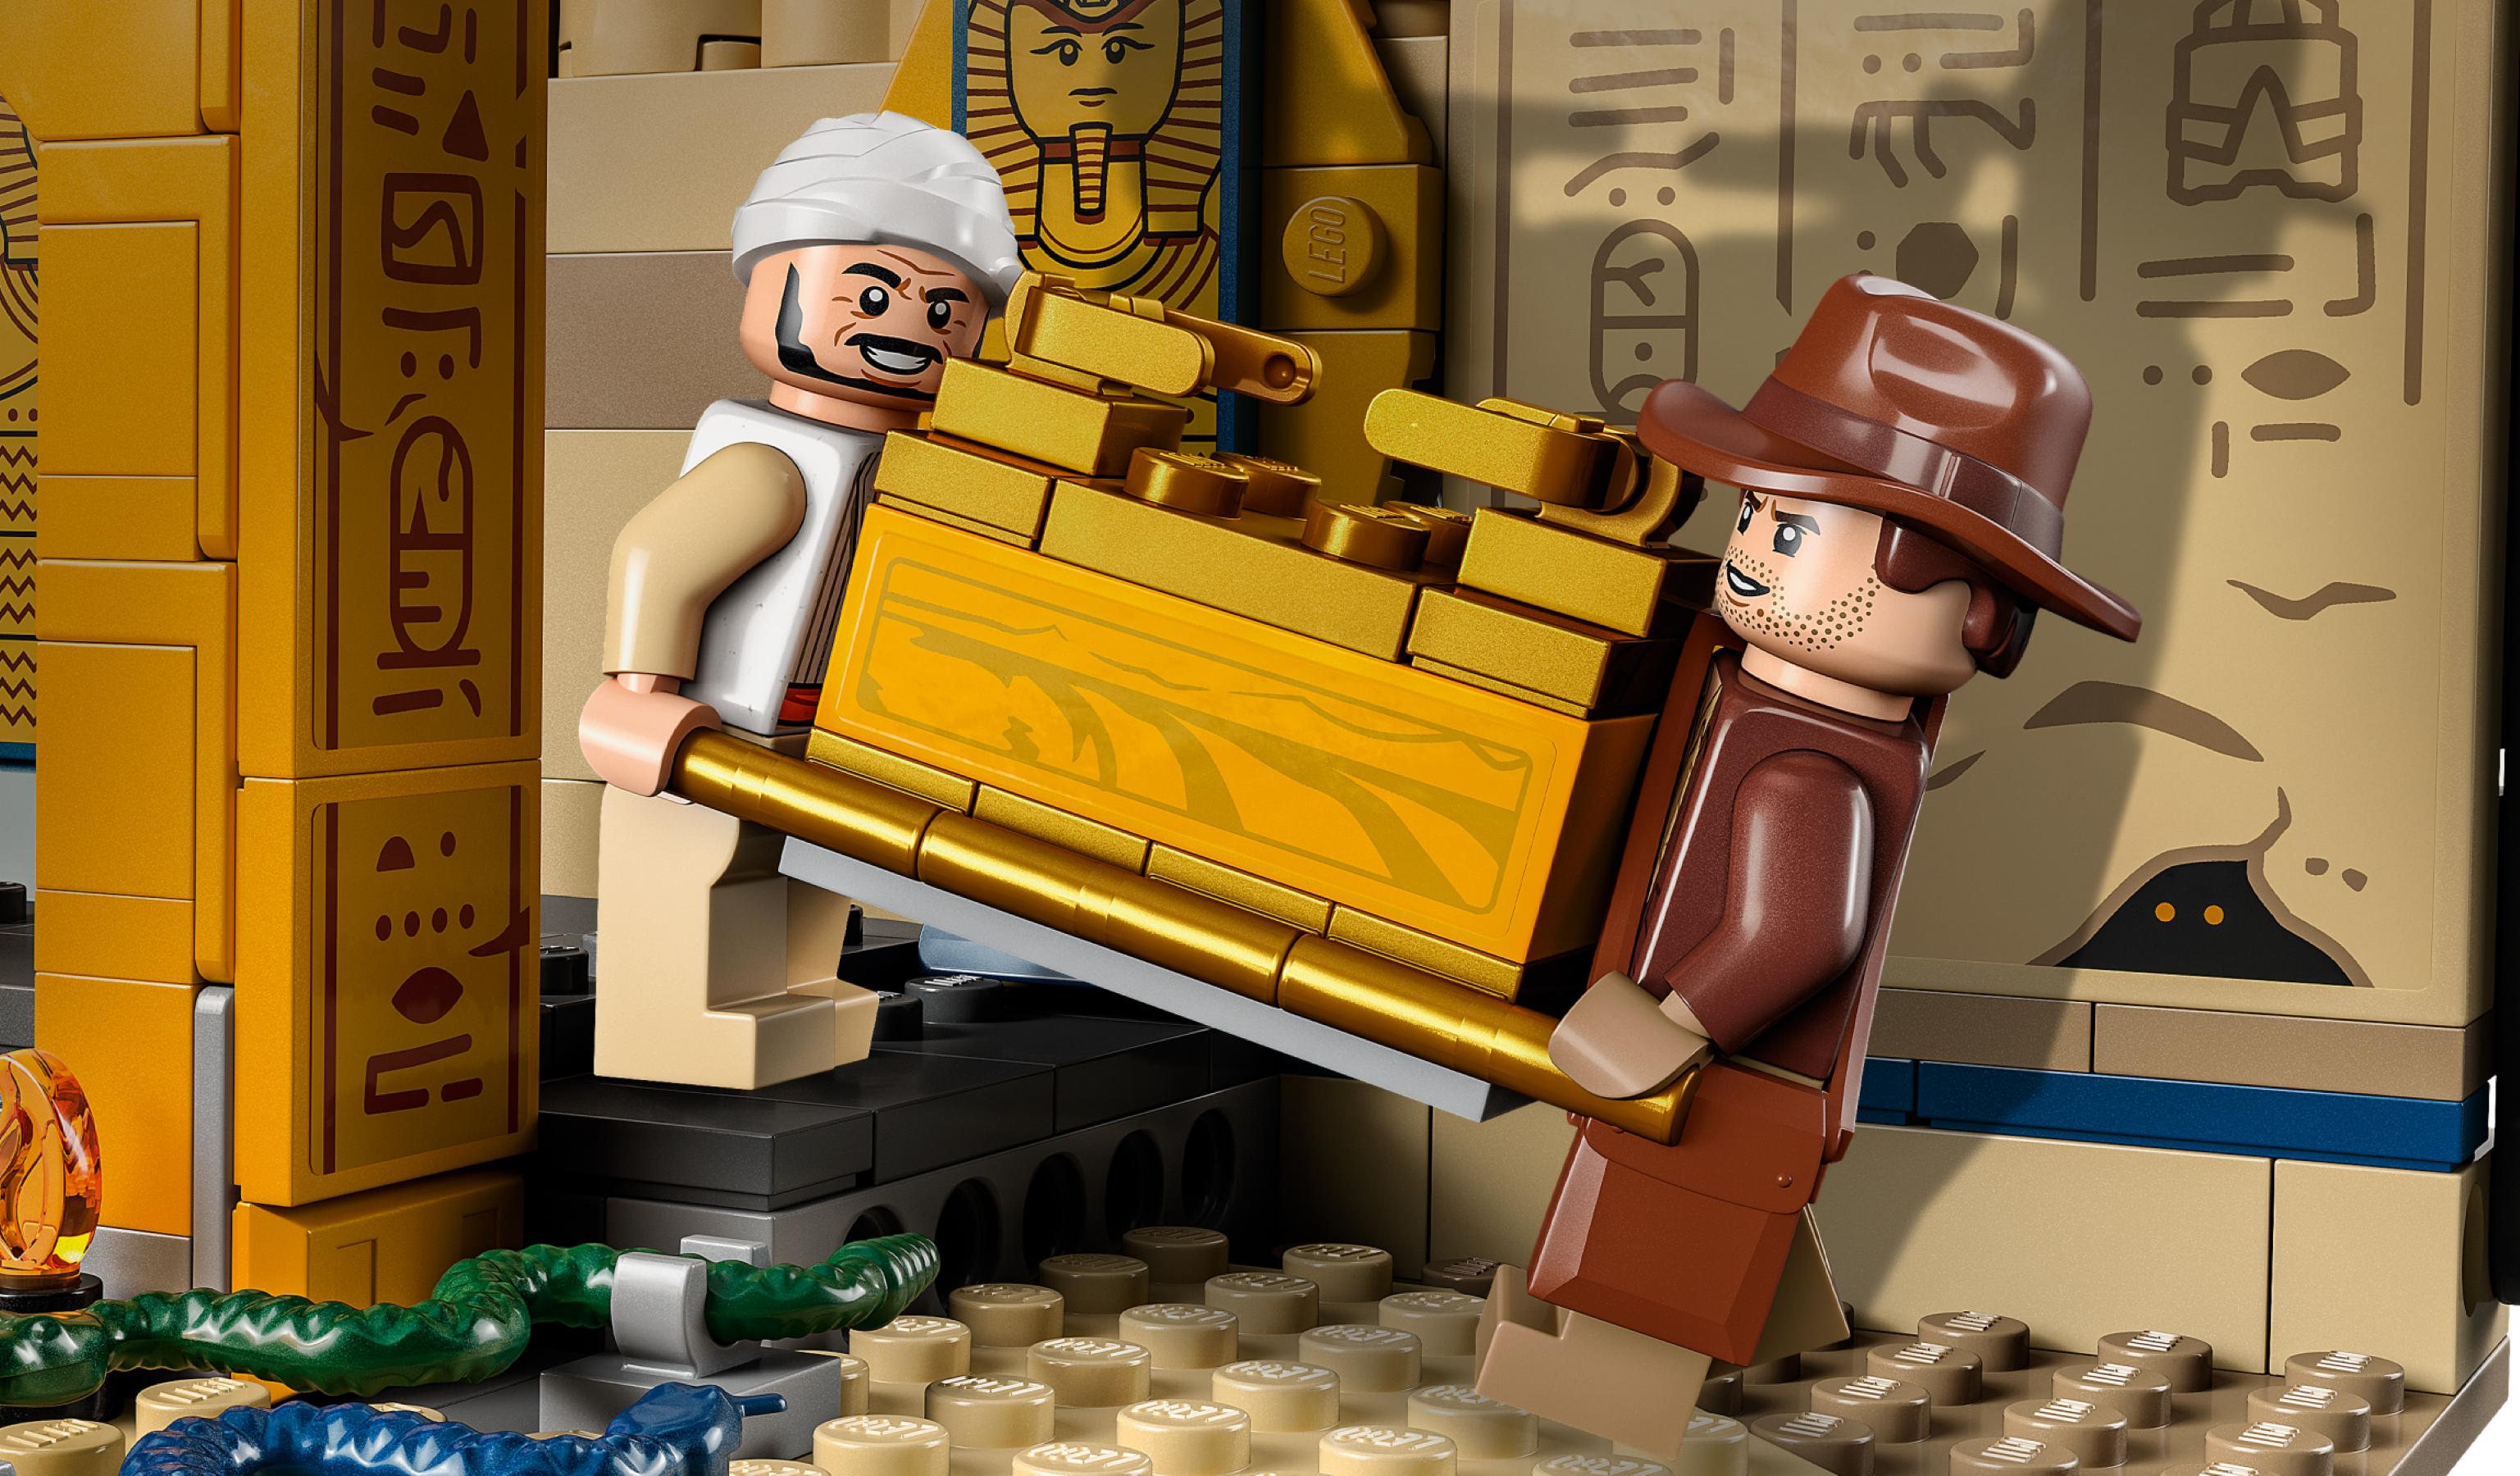 LEGO Indiana Jones Escape from The Lost Tomb 77013 Building Toy, Featuring  a Mummy and an Indiana Jones Minifigure from Raiders of The Lost Ark Movie